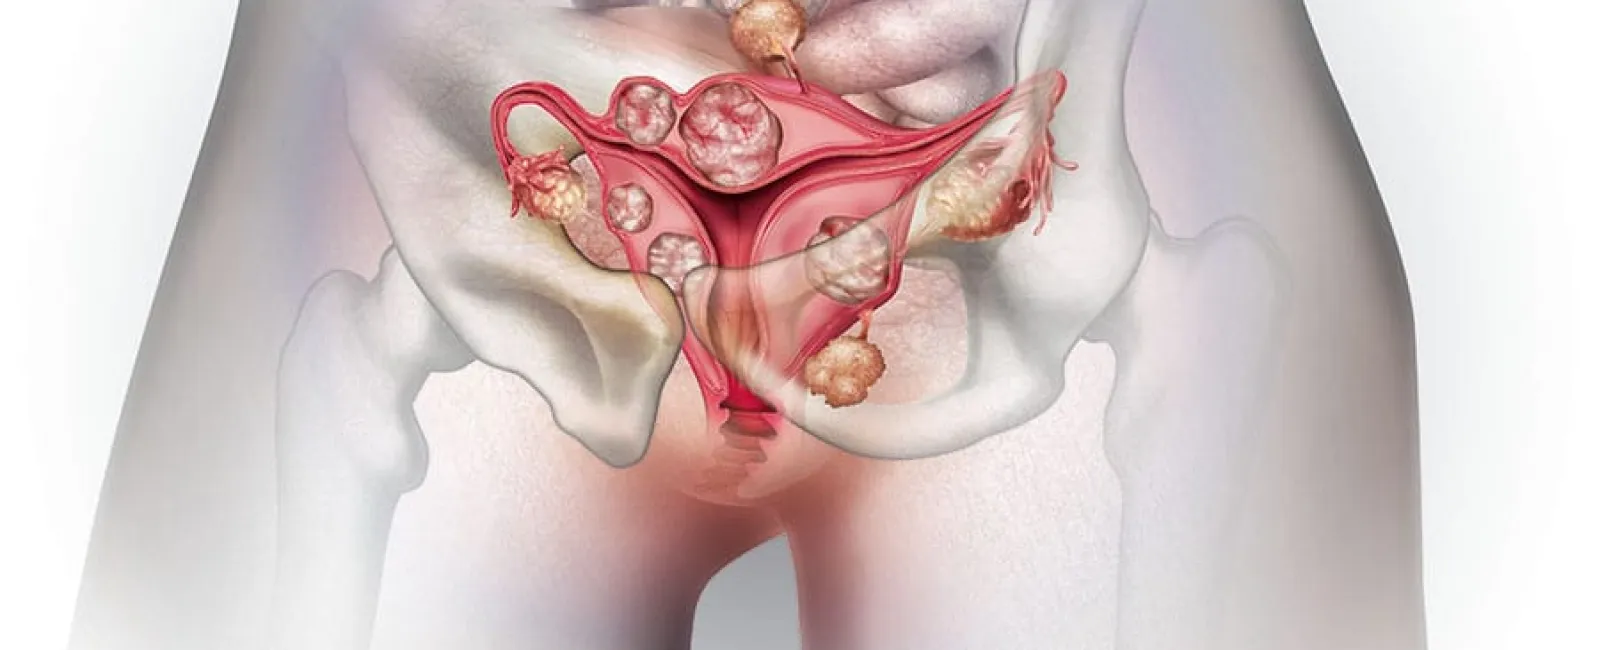 The Difference Between Ovarian Cysts and Fibroids